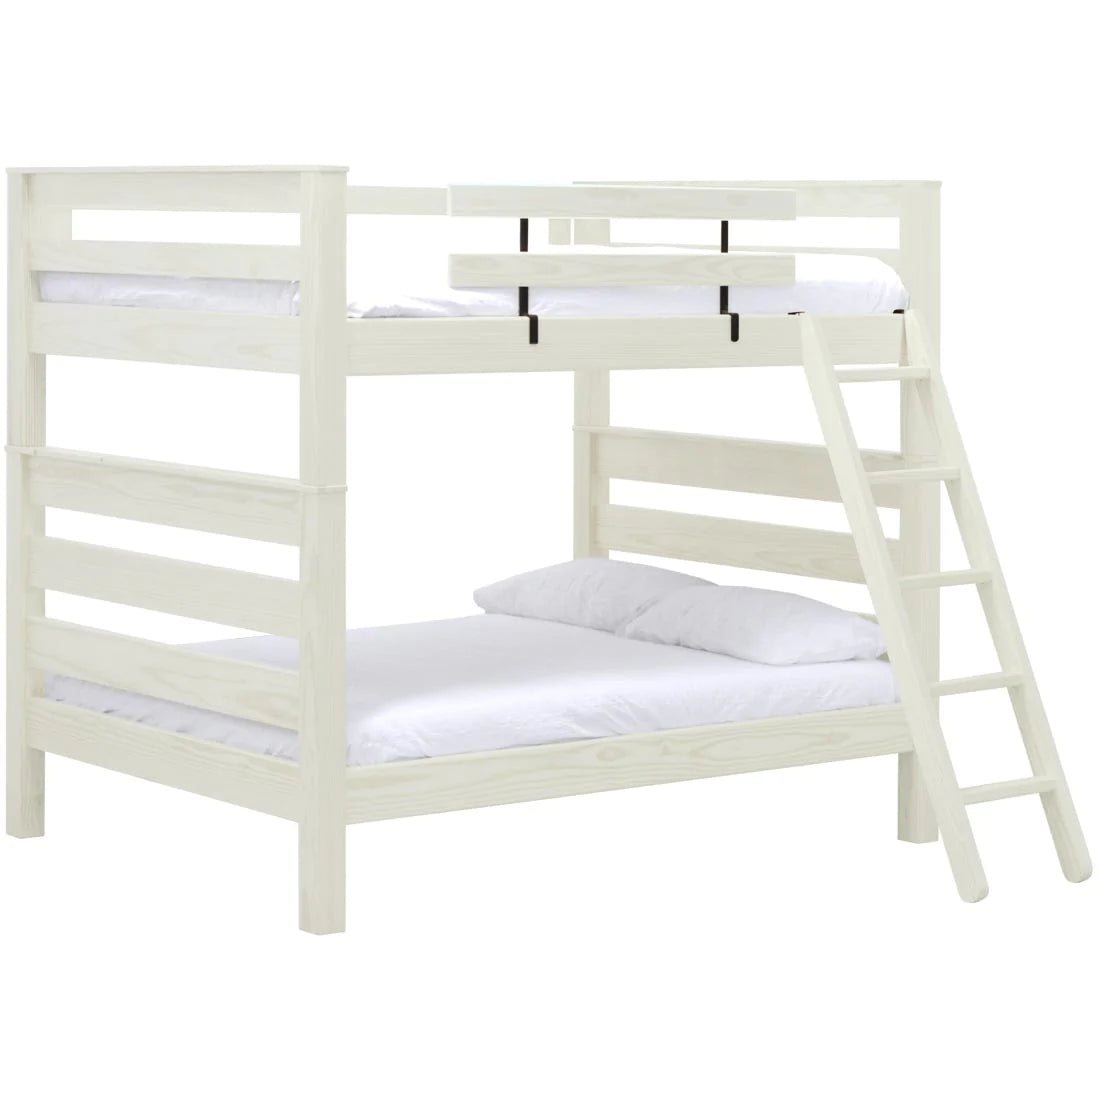 TimberFrame Bunk Double over Double